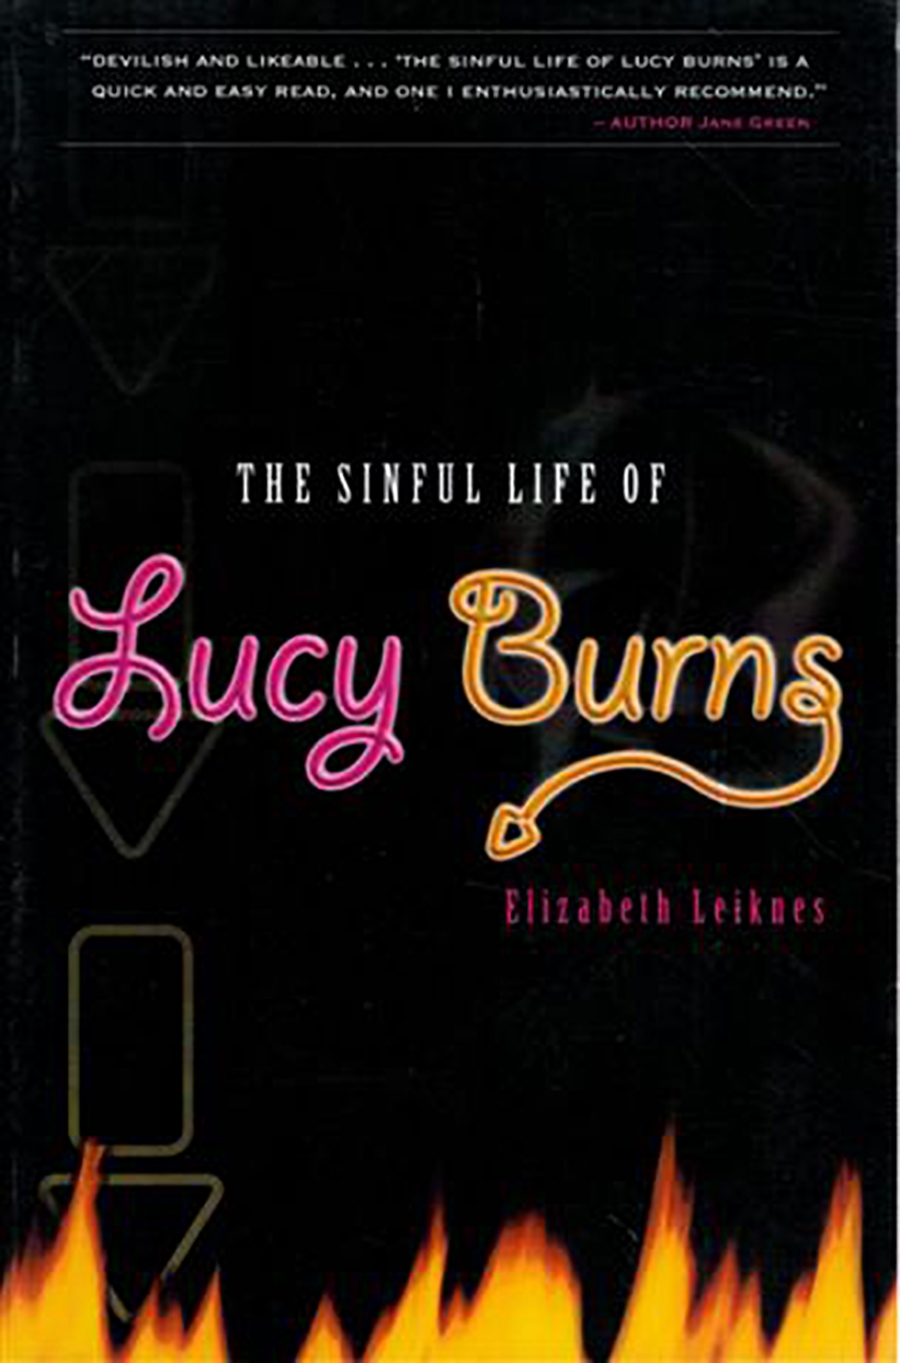 The Sinful Life of Lucy Burns